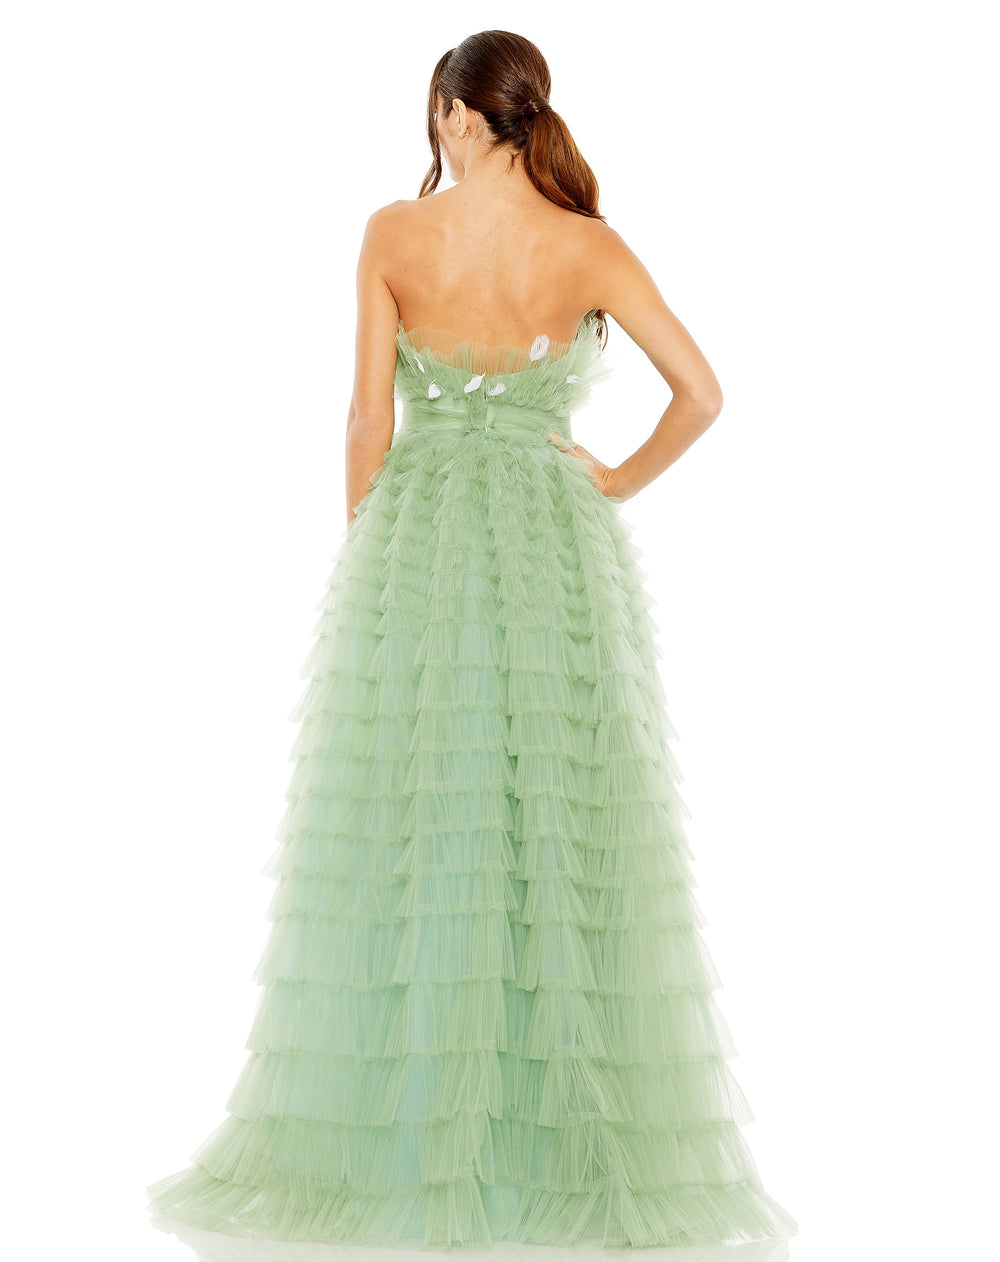 Strapless Ruffle Gown with Feathers - FOSTANI